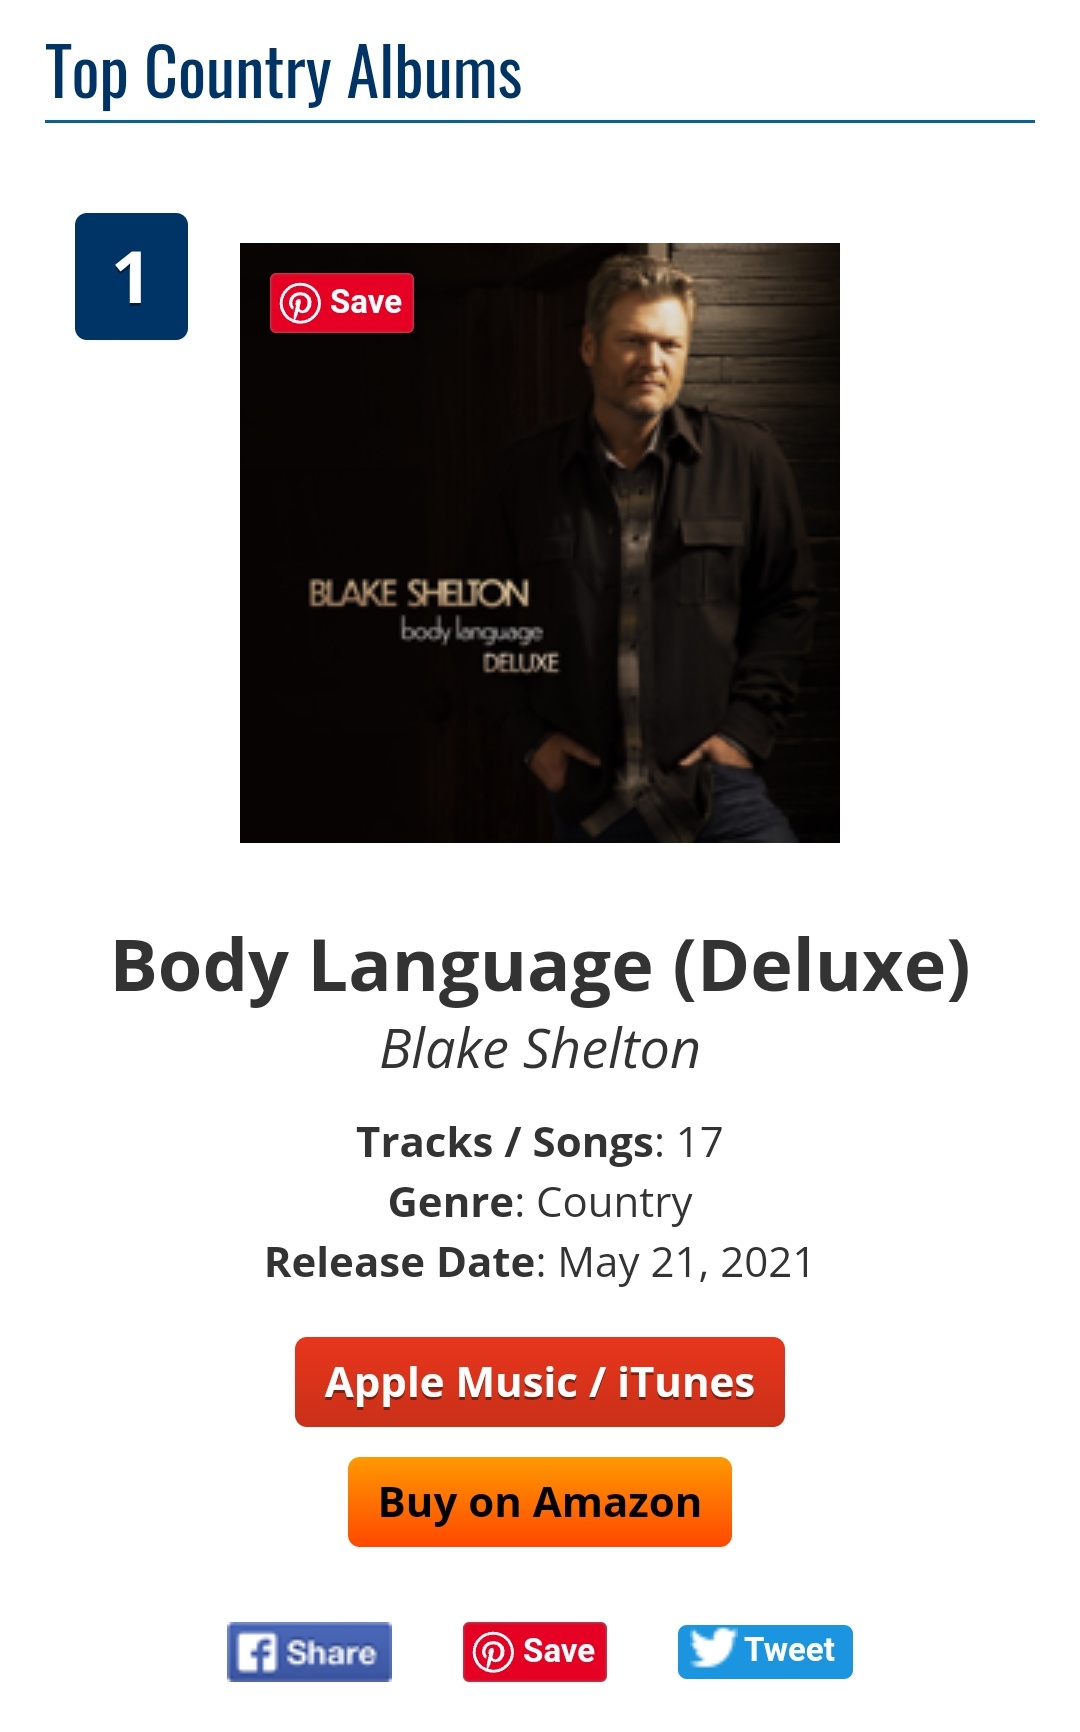 telt Far strejke B ♡ G | fan account on Twitter: "Body Language (Deluxe) by Blake Shelton is  #1 on iTunes Top 100 Country Albums 🥳 https://t.co/UrG7cOfPUi" / Twitter